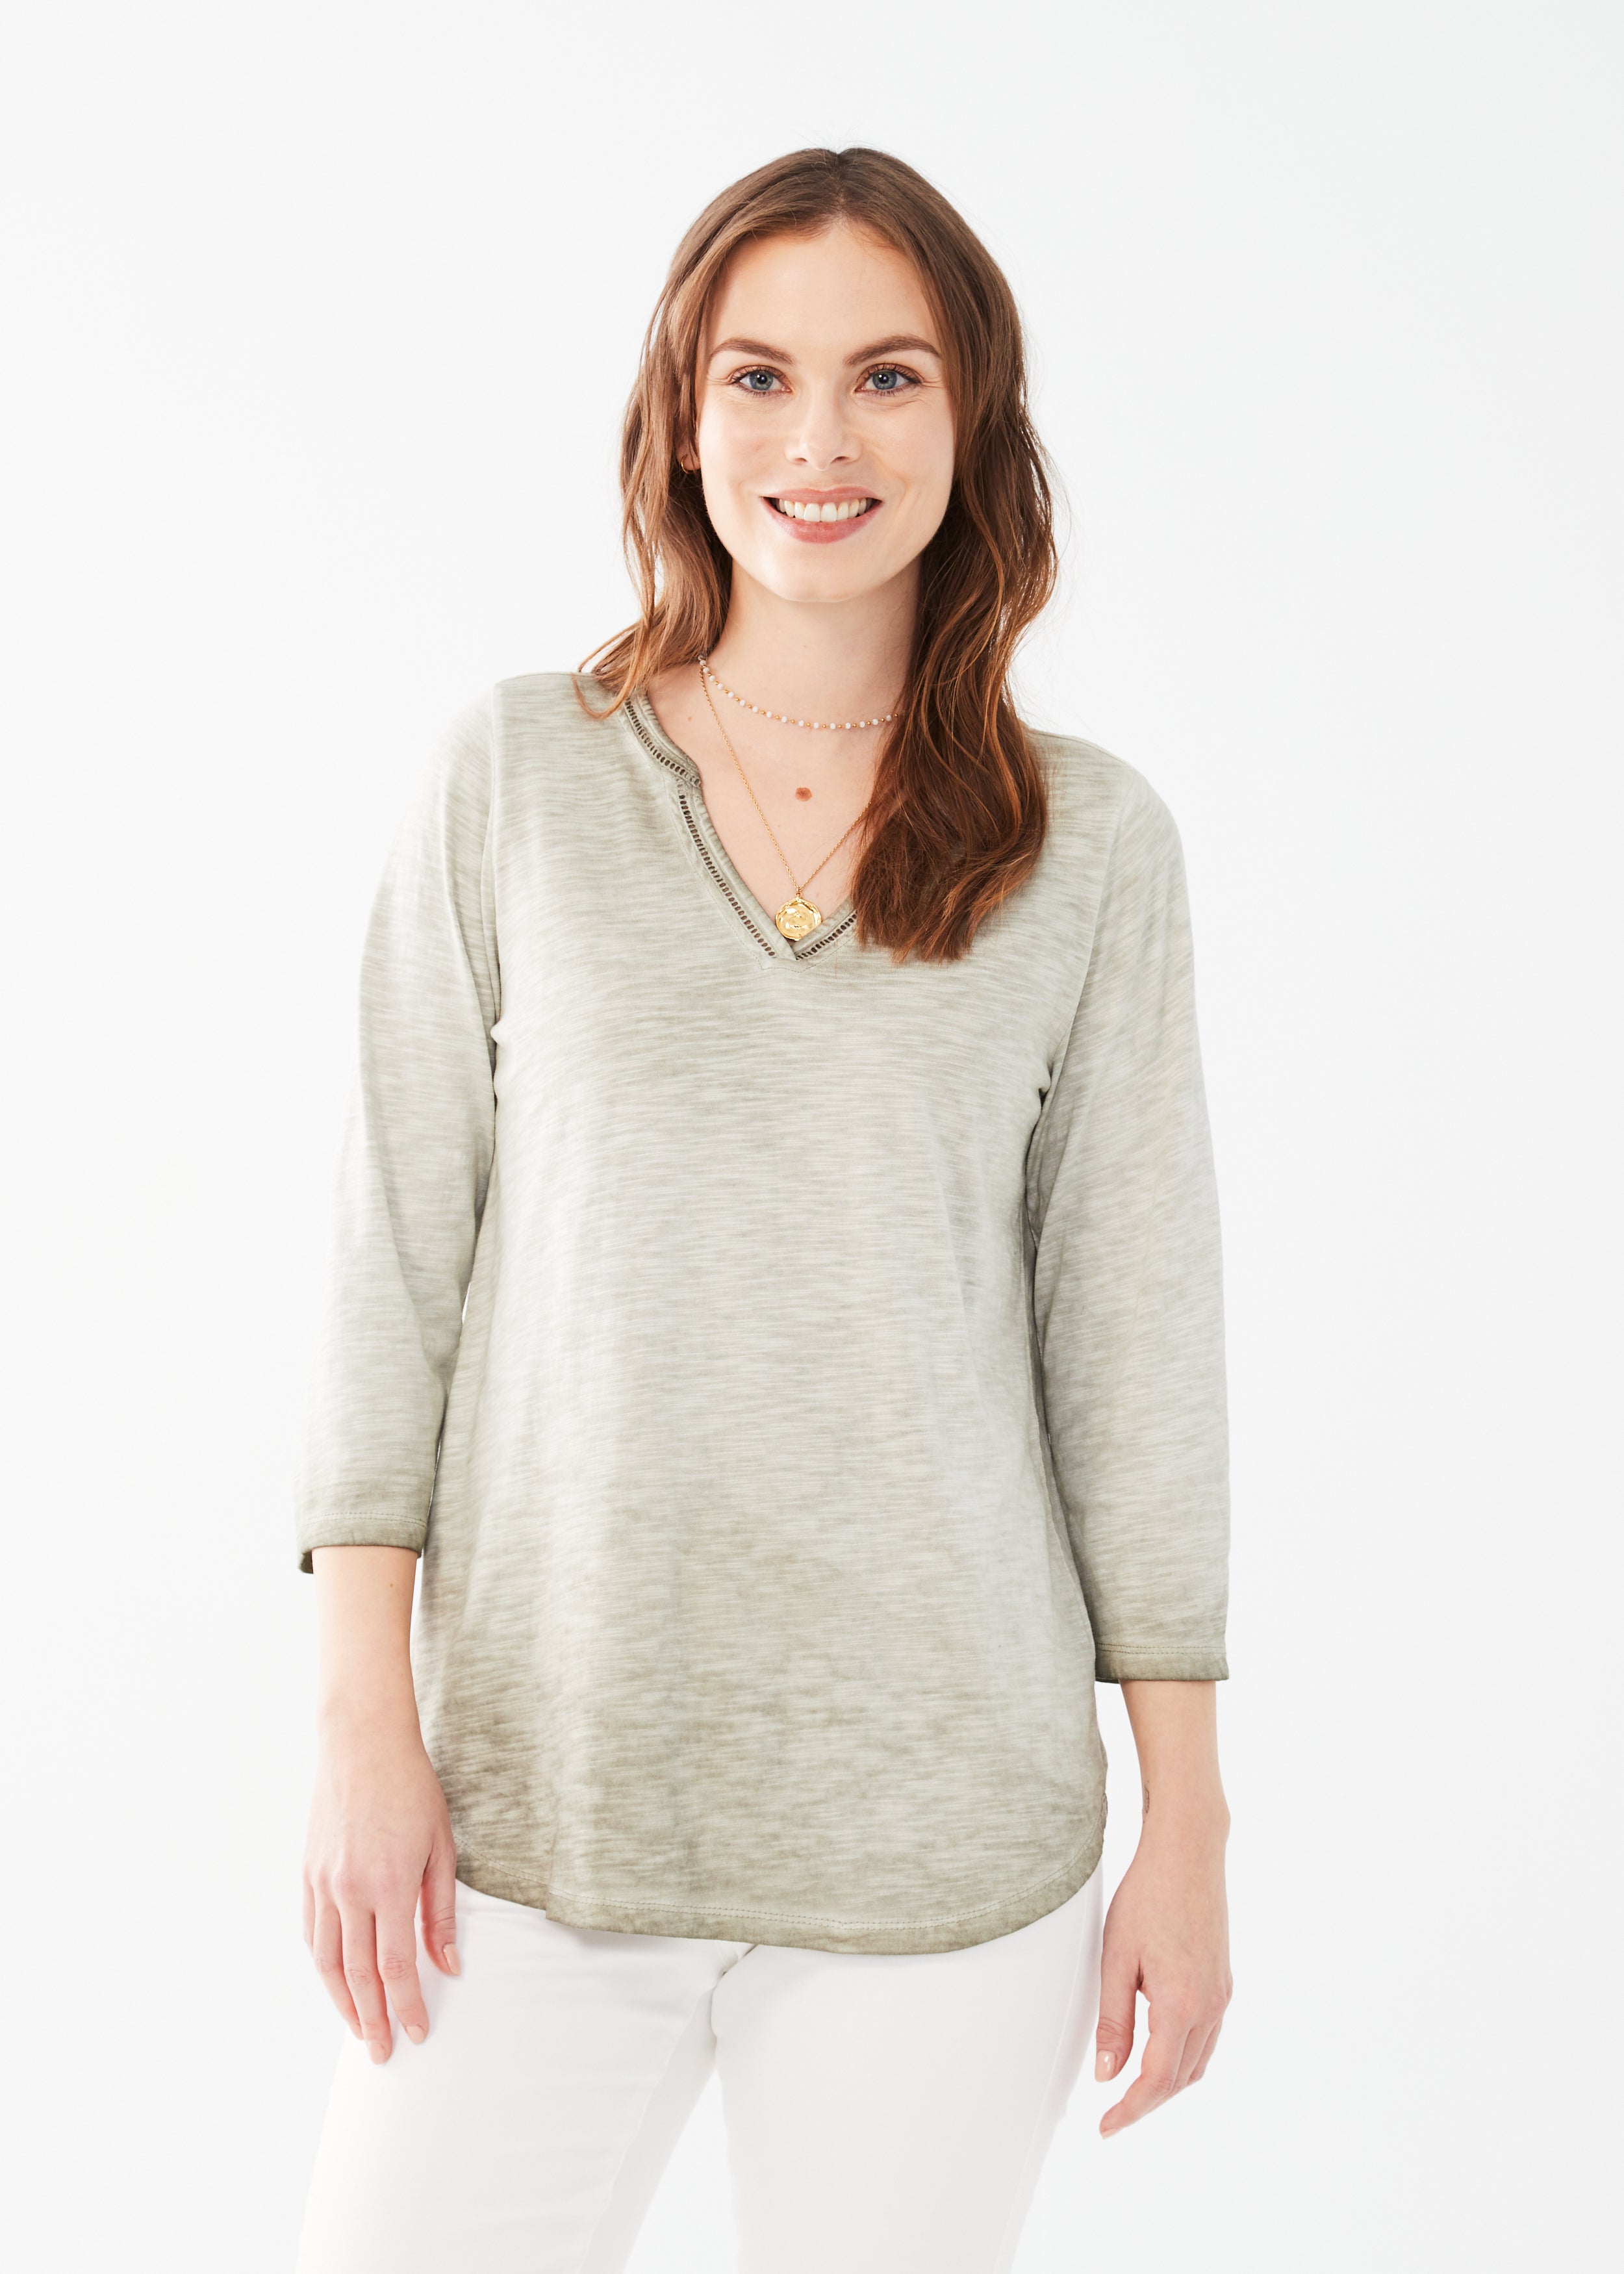 The FDJ 3/4 Sleeve Split Neck Top, available in 2 colours, is the perfect staple piece for any wardrobe!